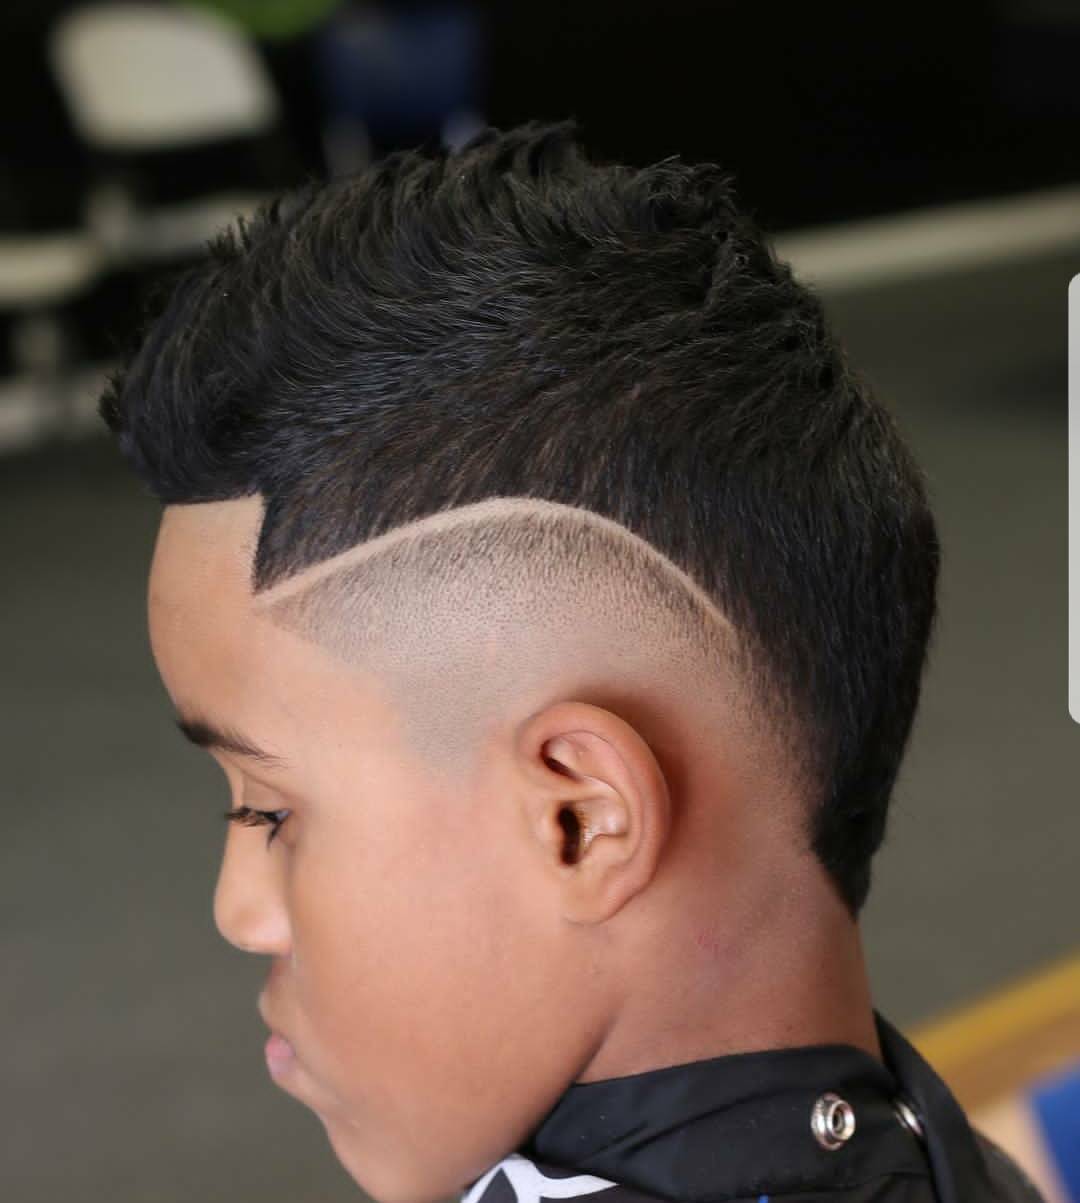 MoHawk + Hi-lo Fade Hairstyle for boys